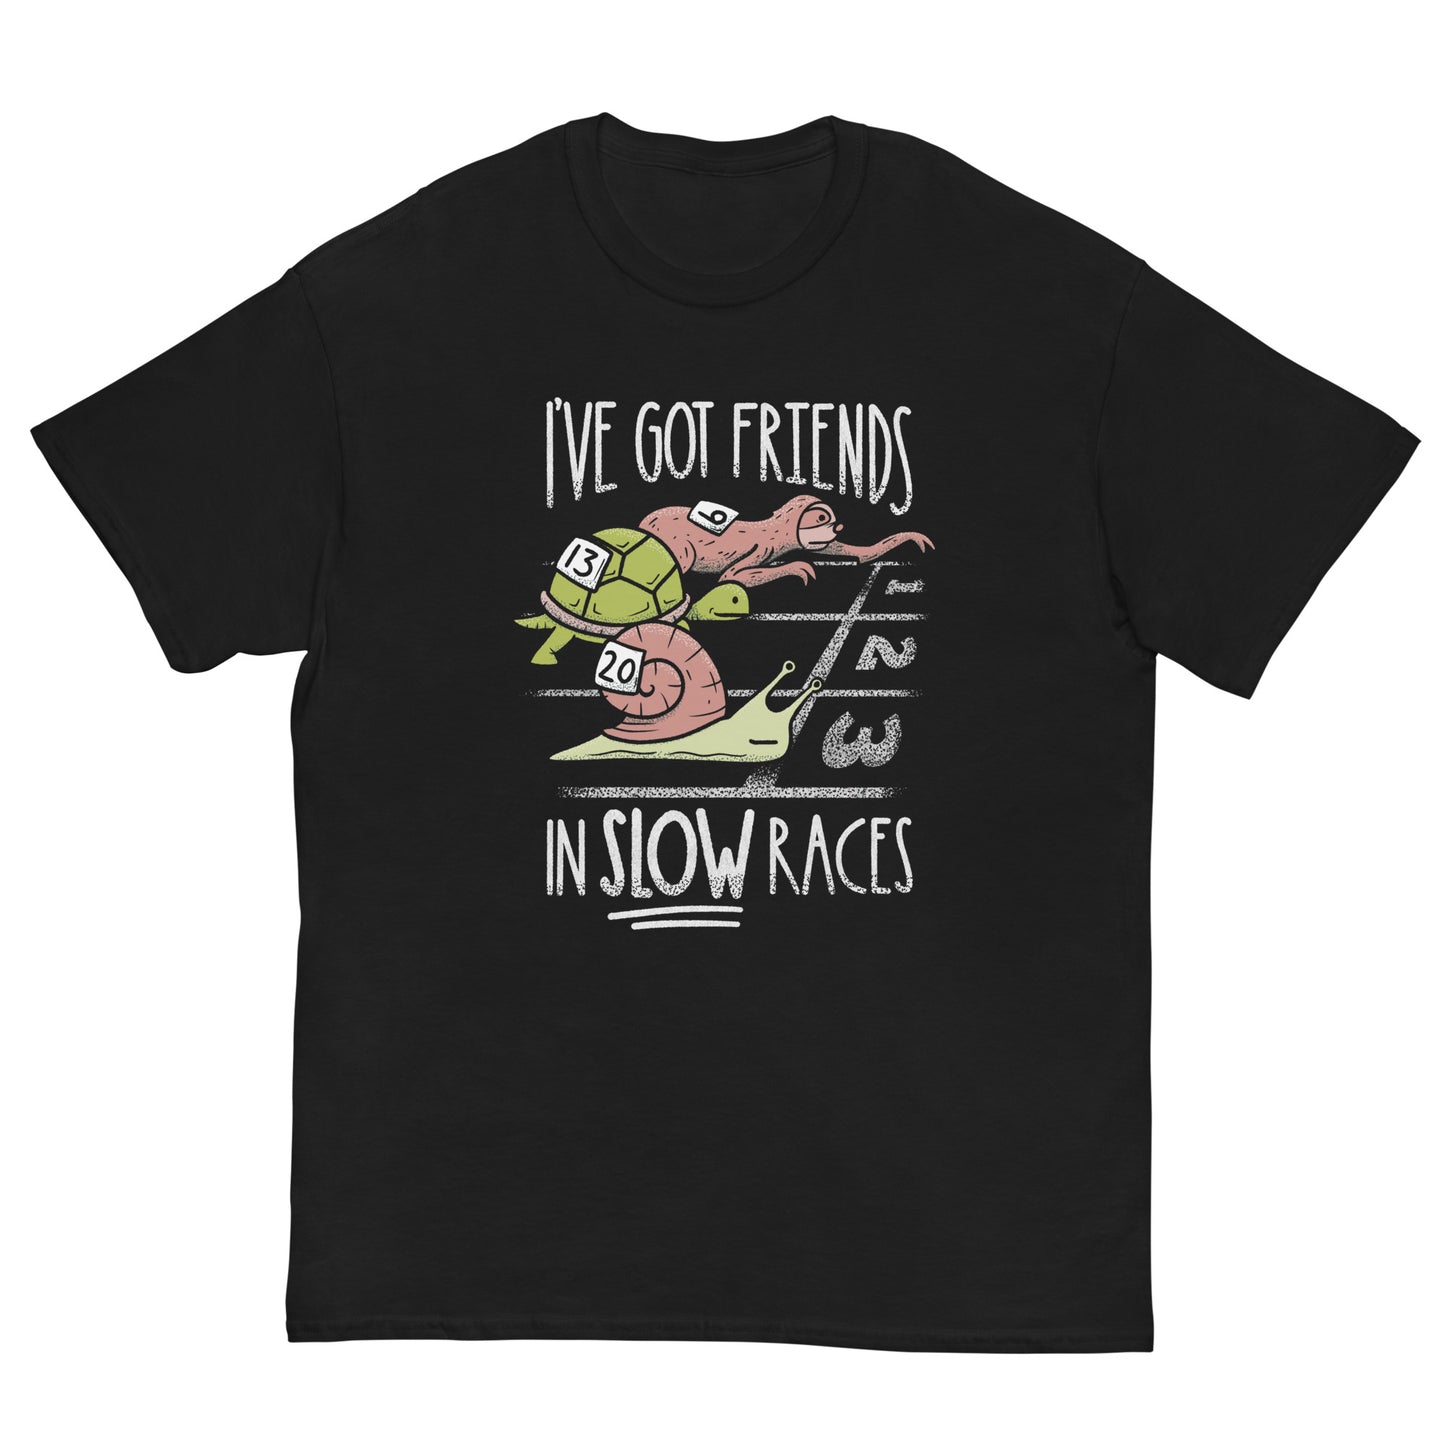 I've Got Friends in Slow Races Funny Animal T-shirt